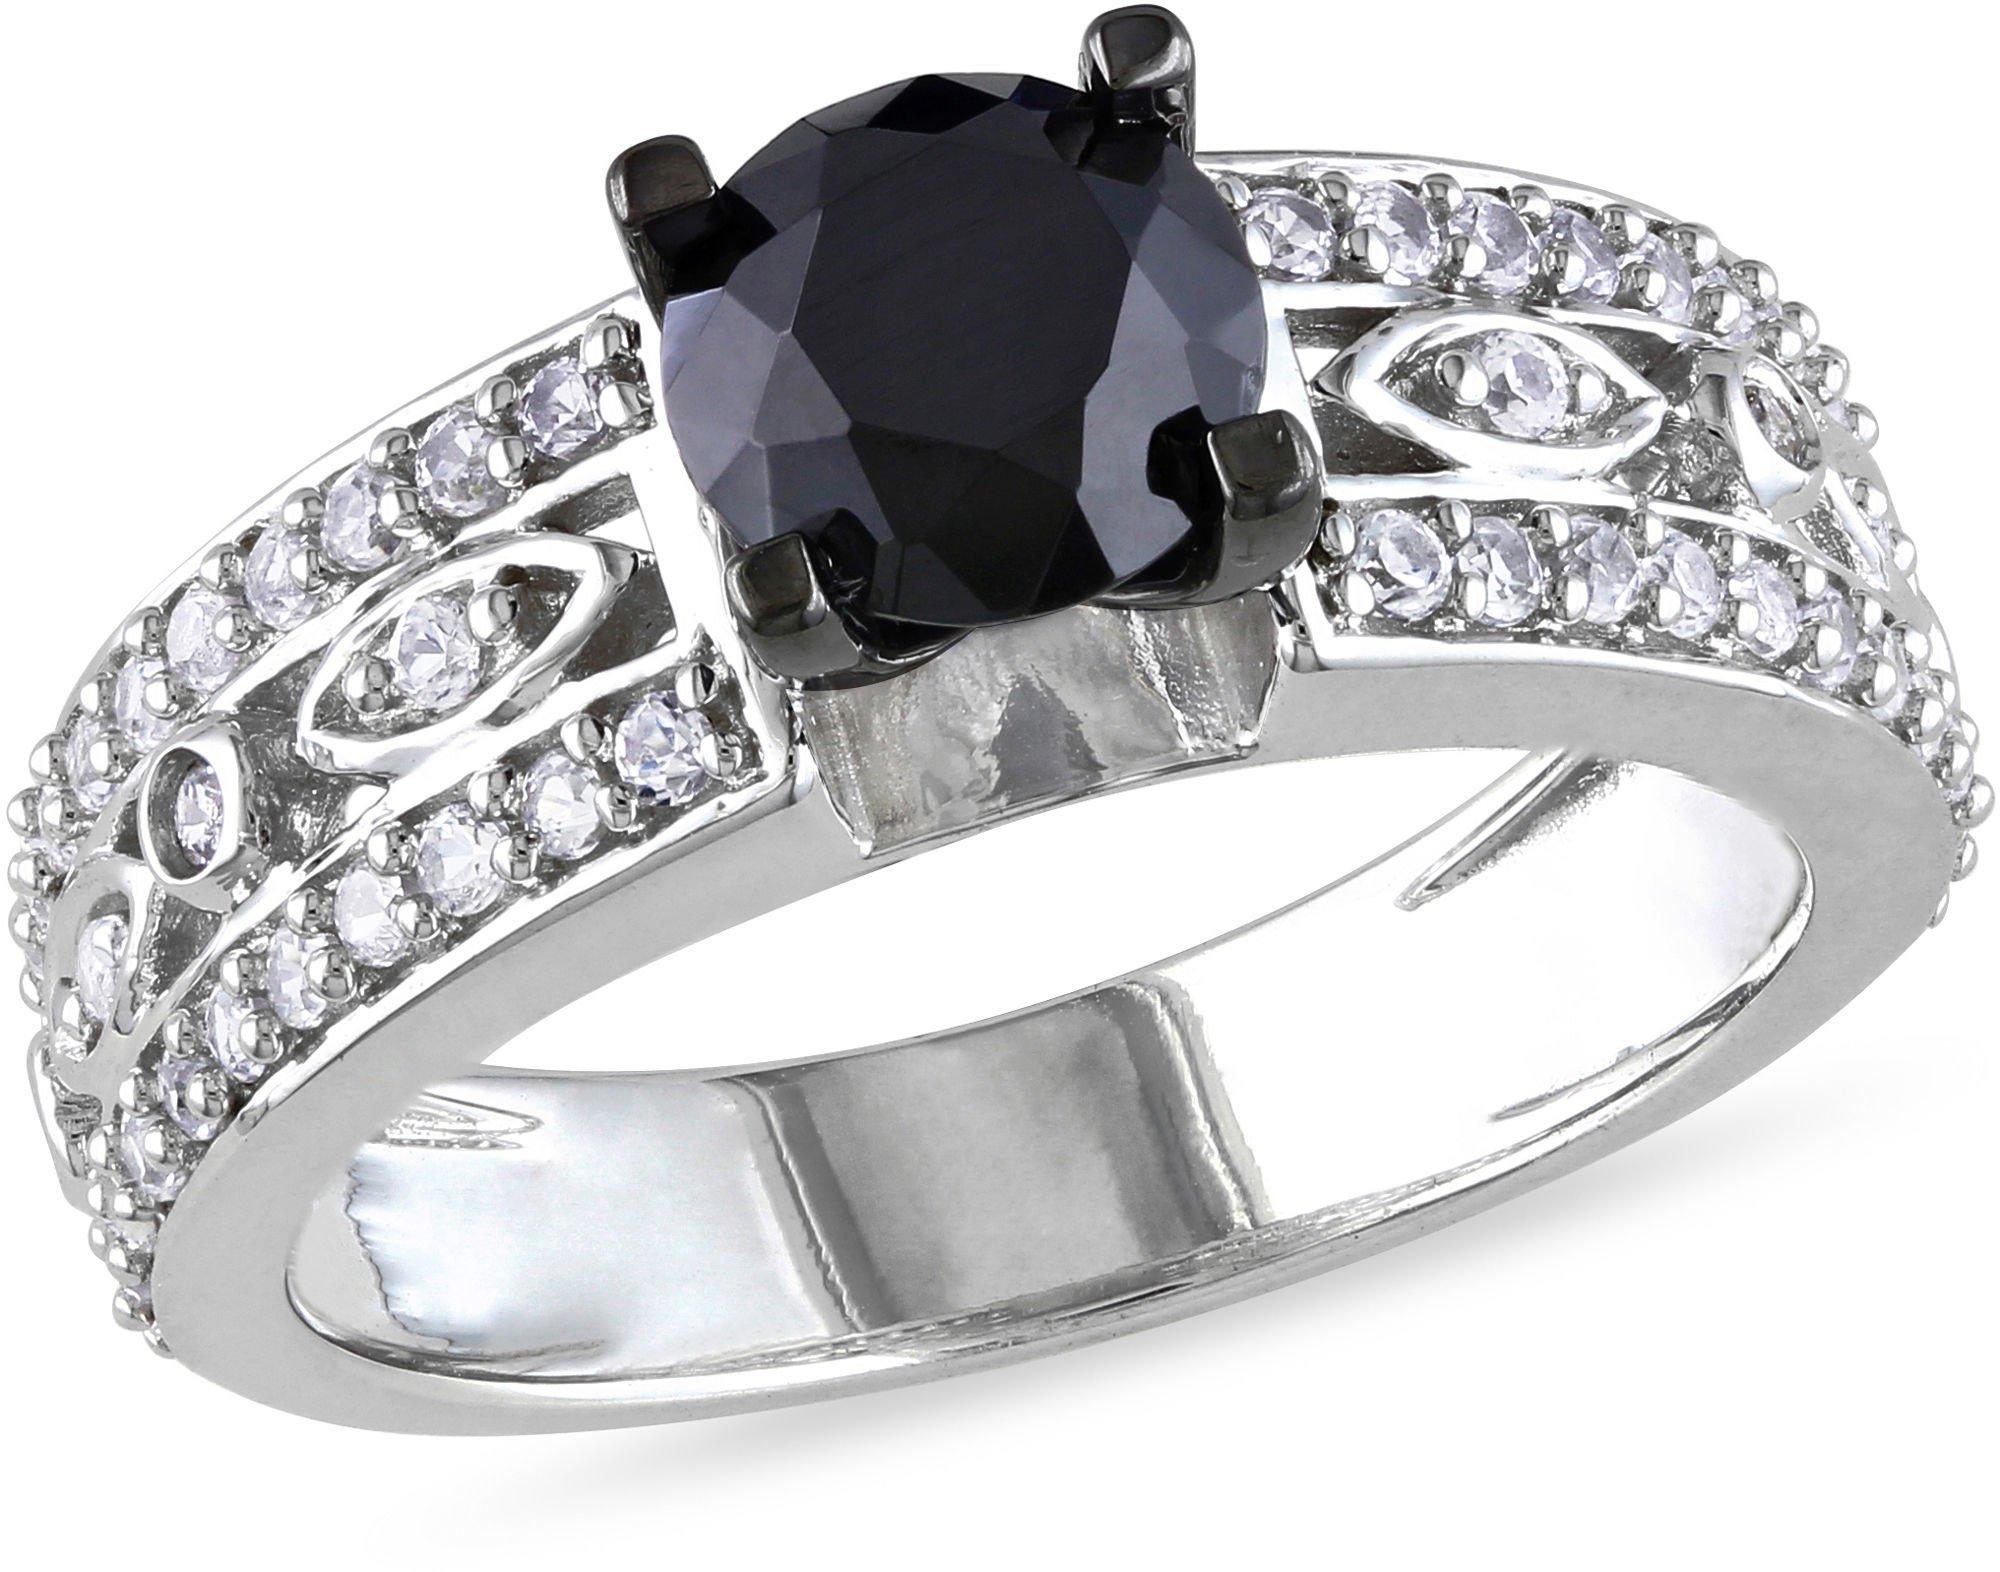 1 3/4-ct. T.G.W. Black Spinel Ring